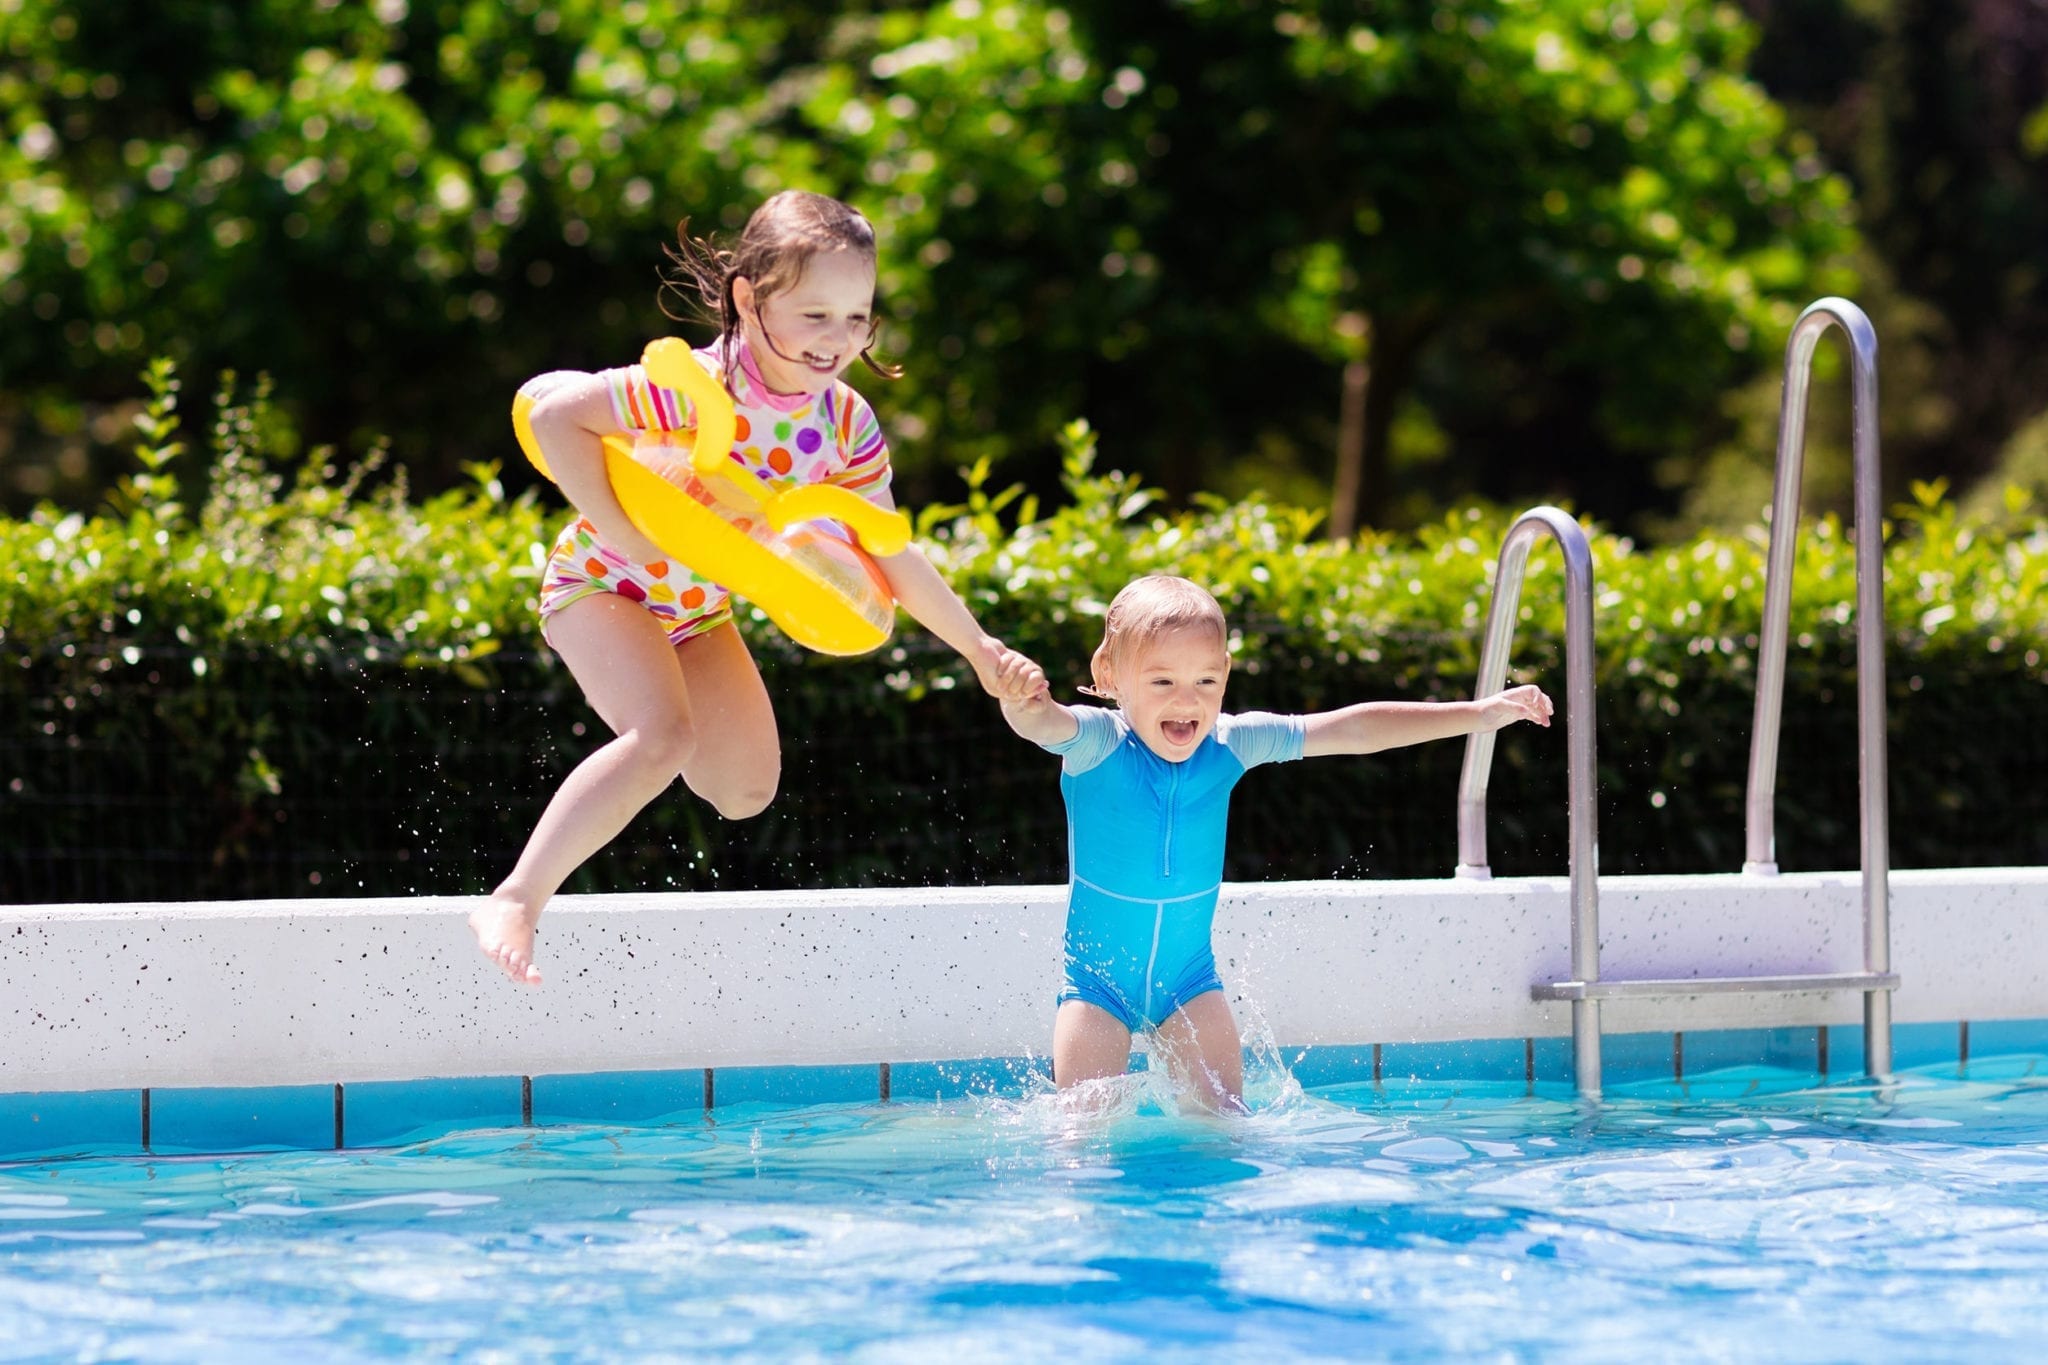 Types of Pool Injuries Florida Parents Should Watch For